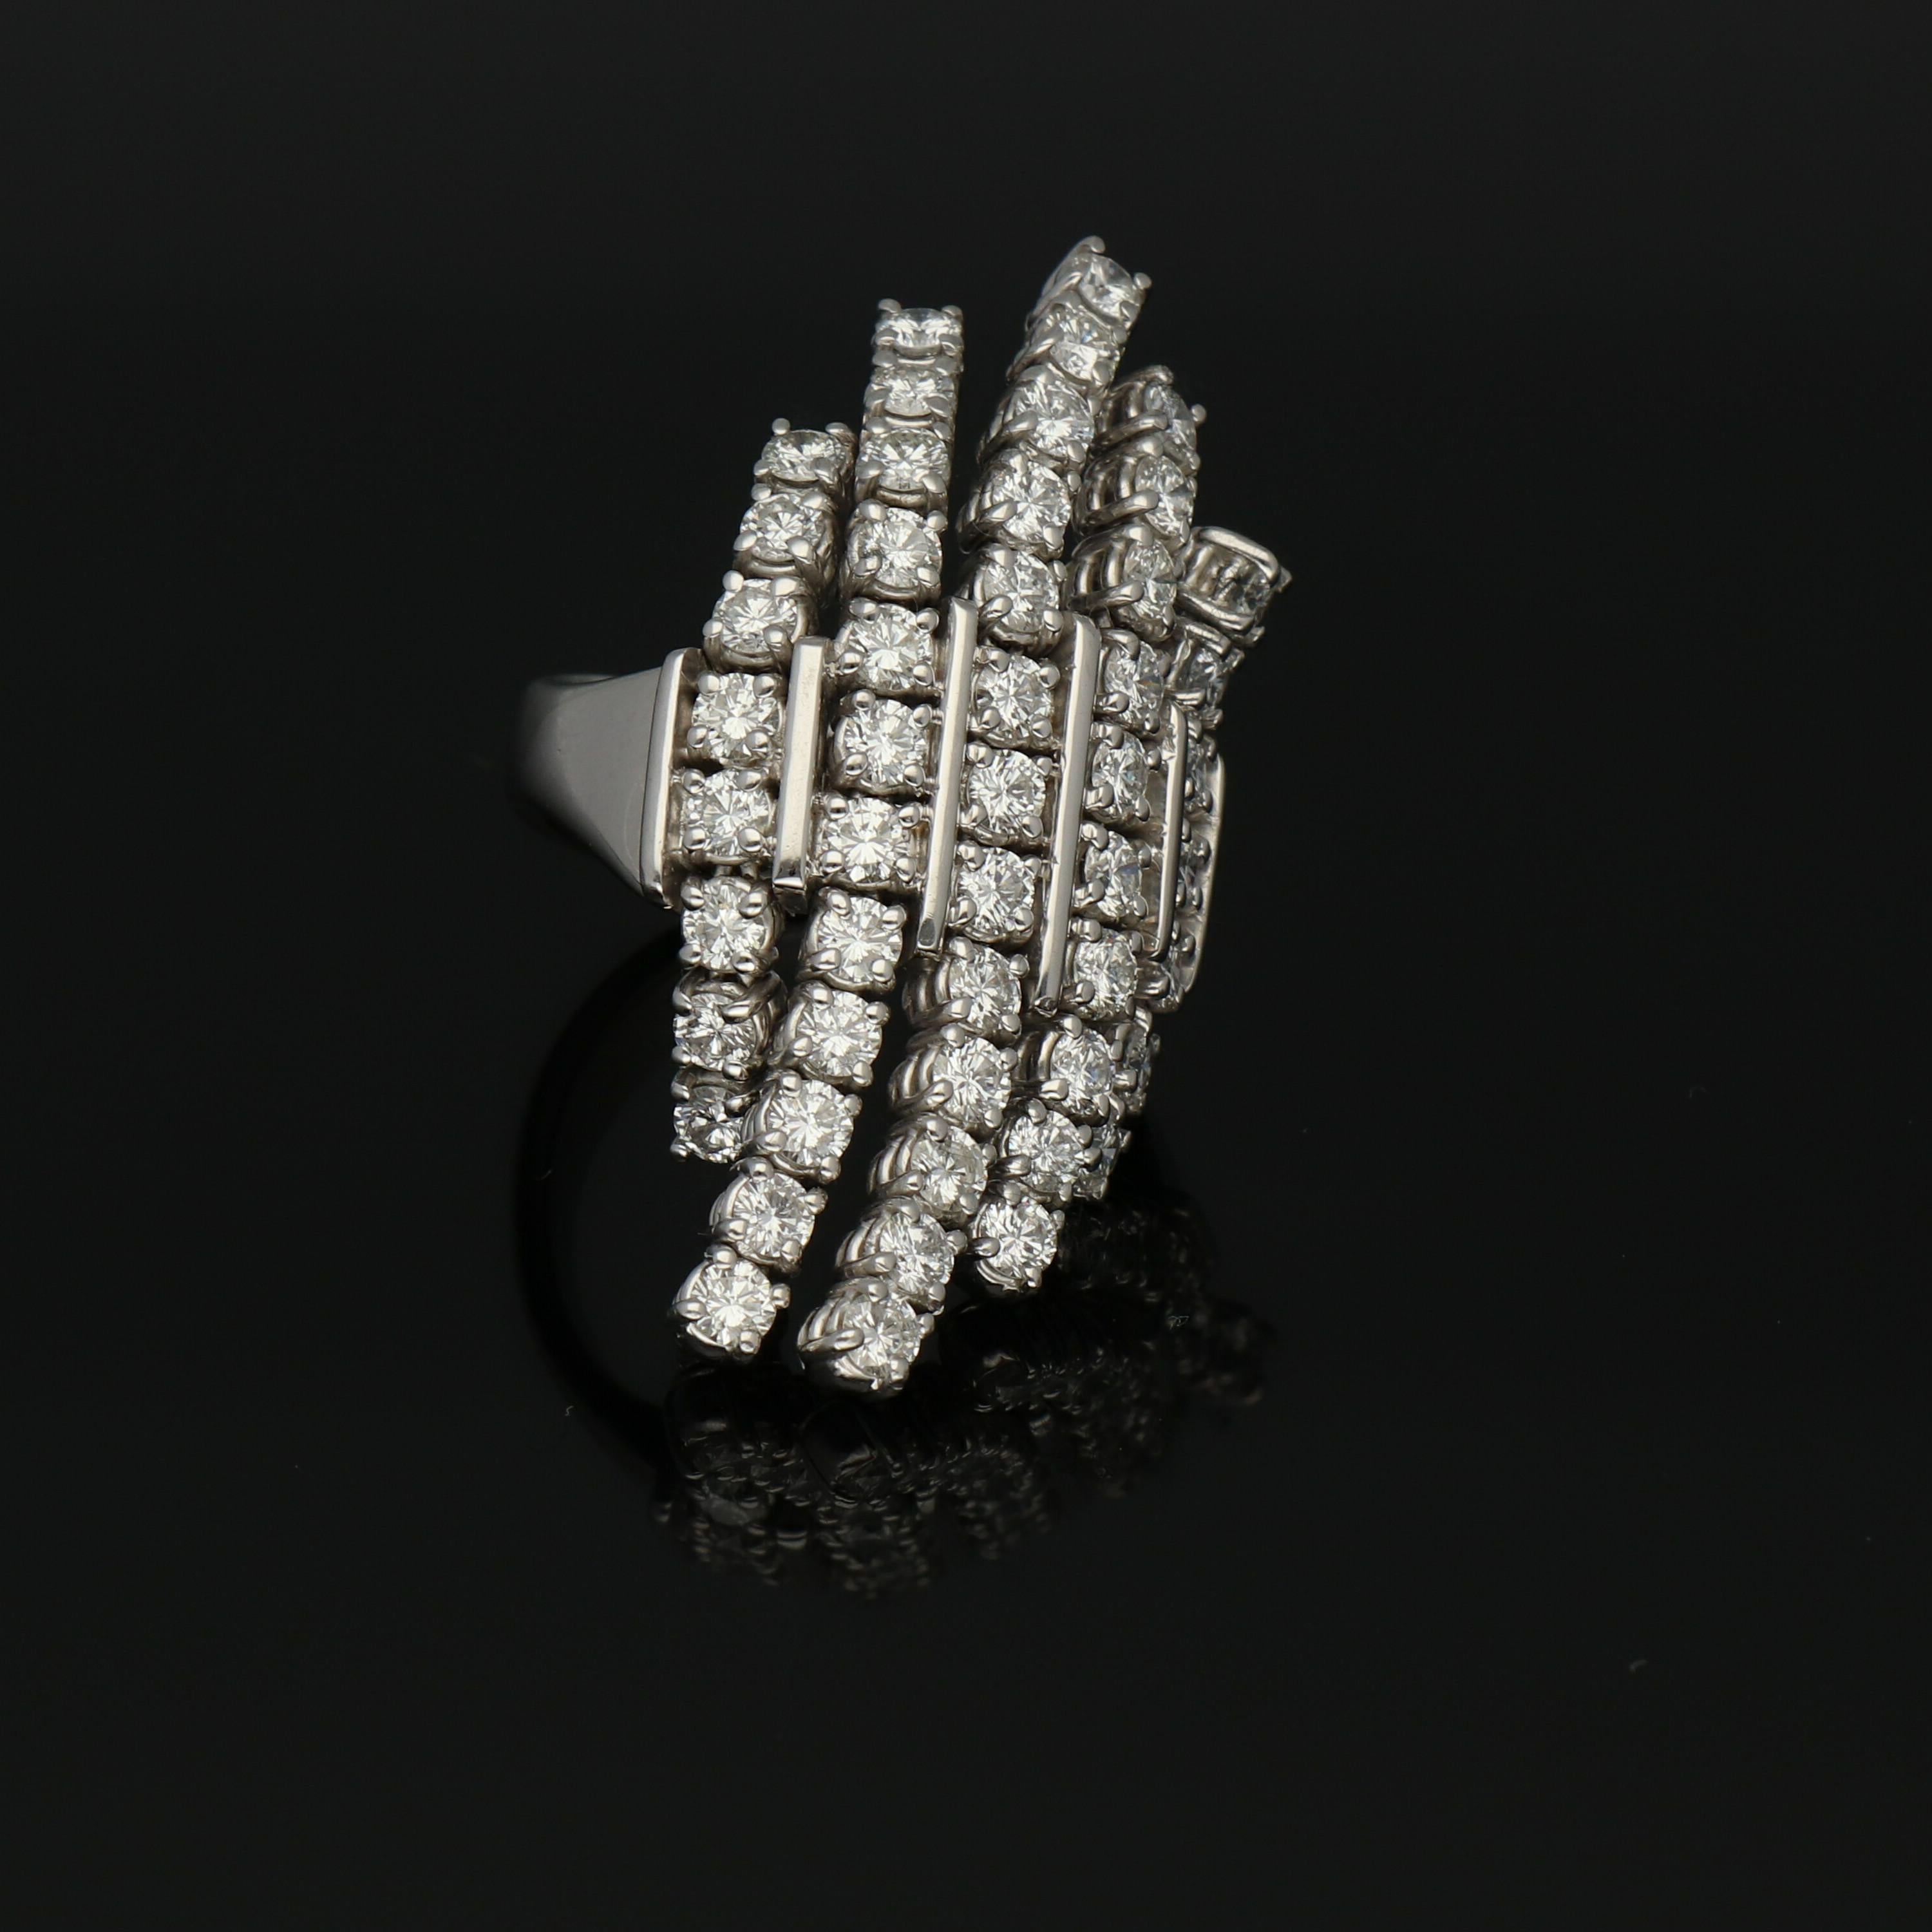 A Gavello modern design with 3.9 carats diamonds, set in an ergonomic kinetic 18K White Gold Fashion Ring.

Size METRIC 53 AMERICAN 6.5

Components:
18K white gold - 17.10 grams
Diamonds - 3.90 carats G / VS

A ring extremely comfortable.